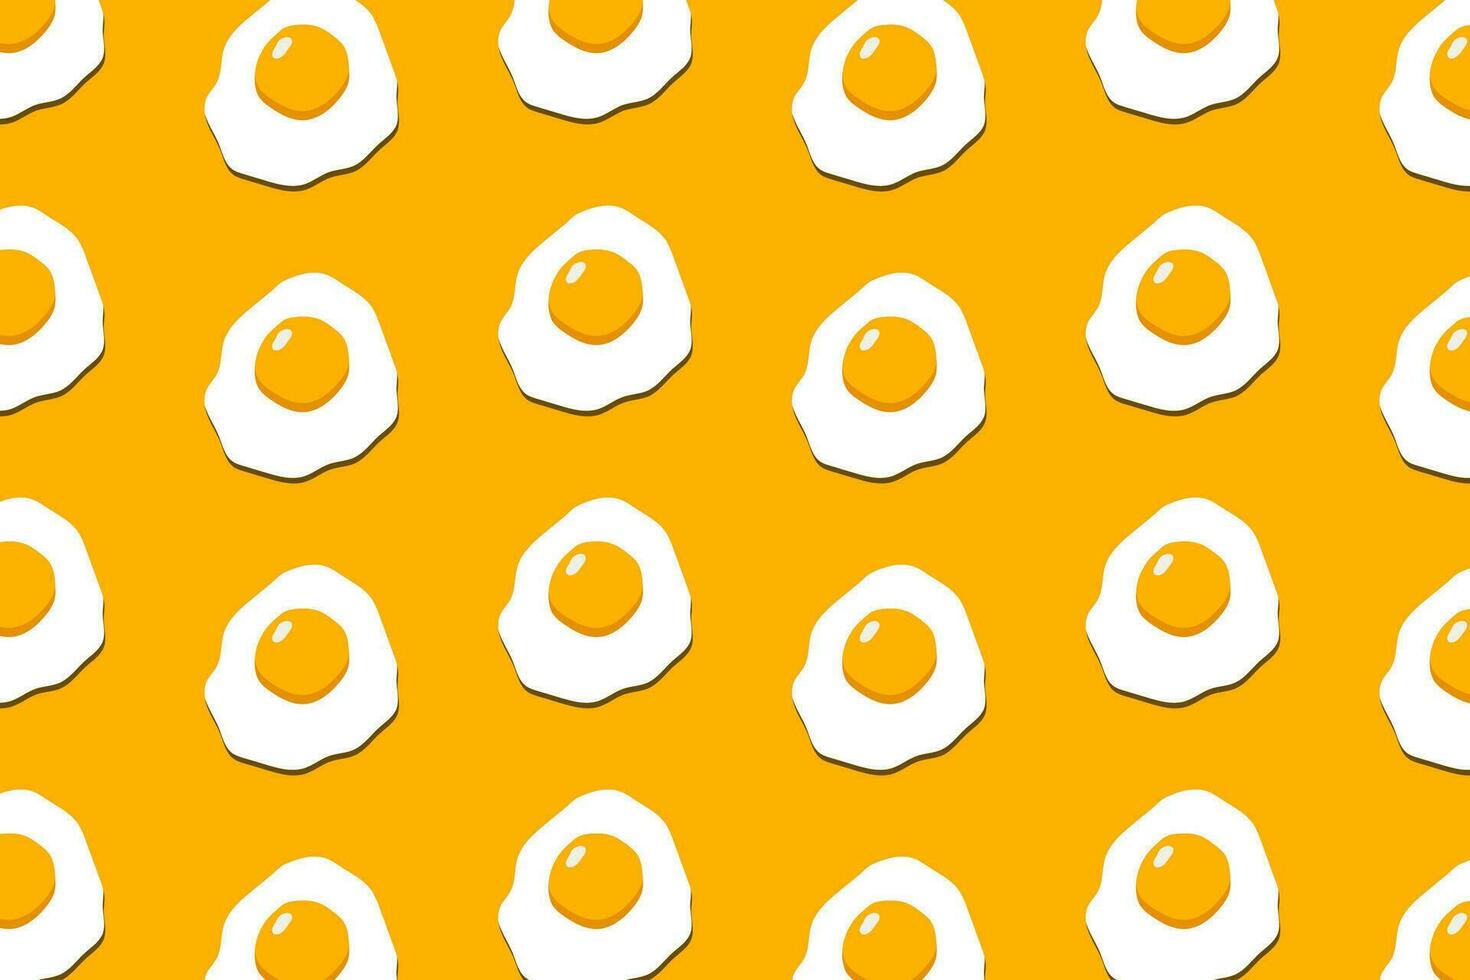 Fried beef eye egg pattern on yellow background. Hand drawn style vector design illustrations.